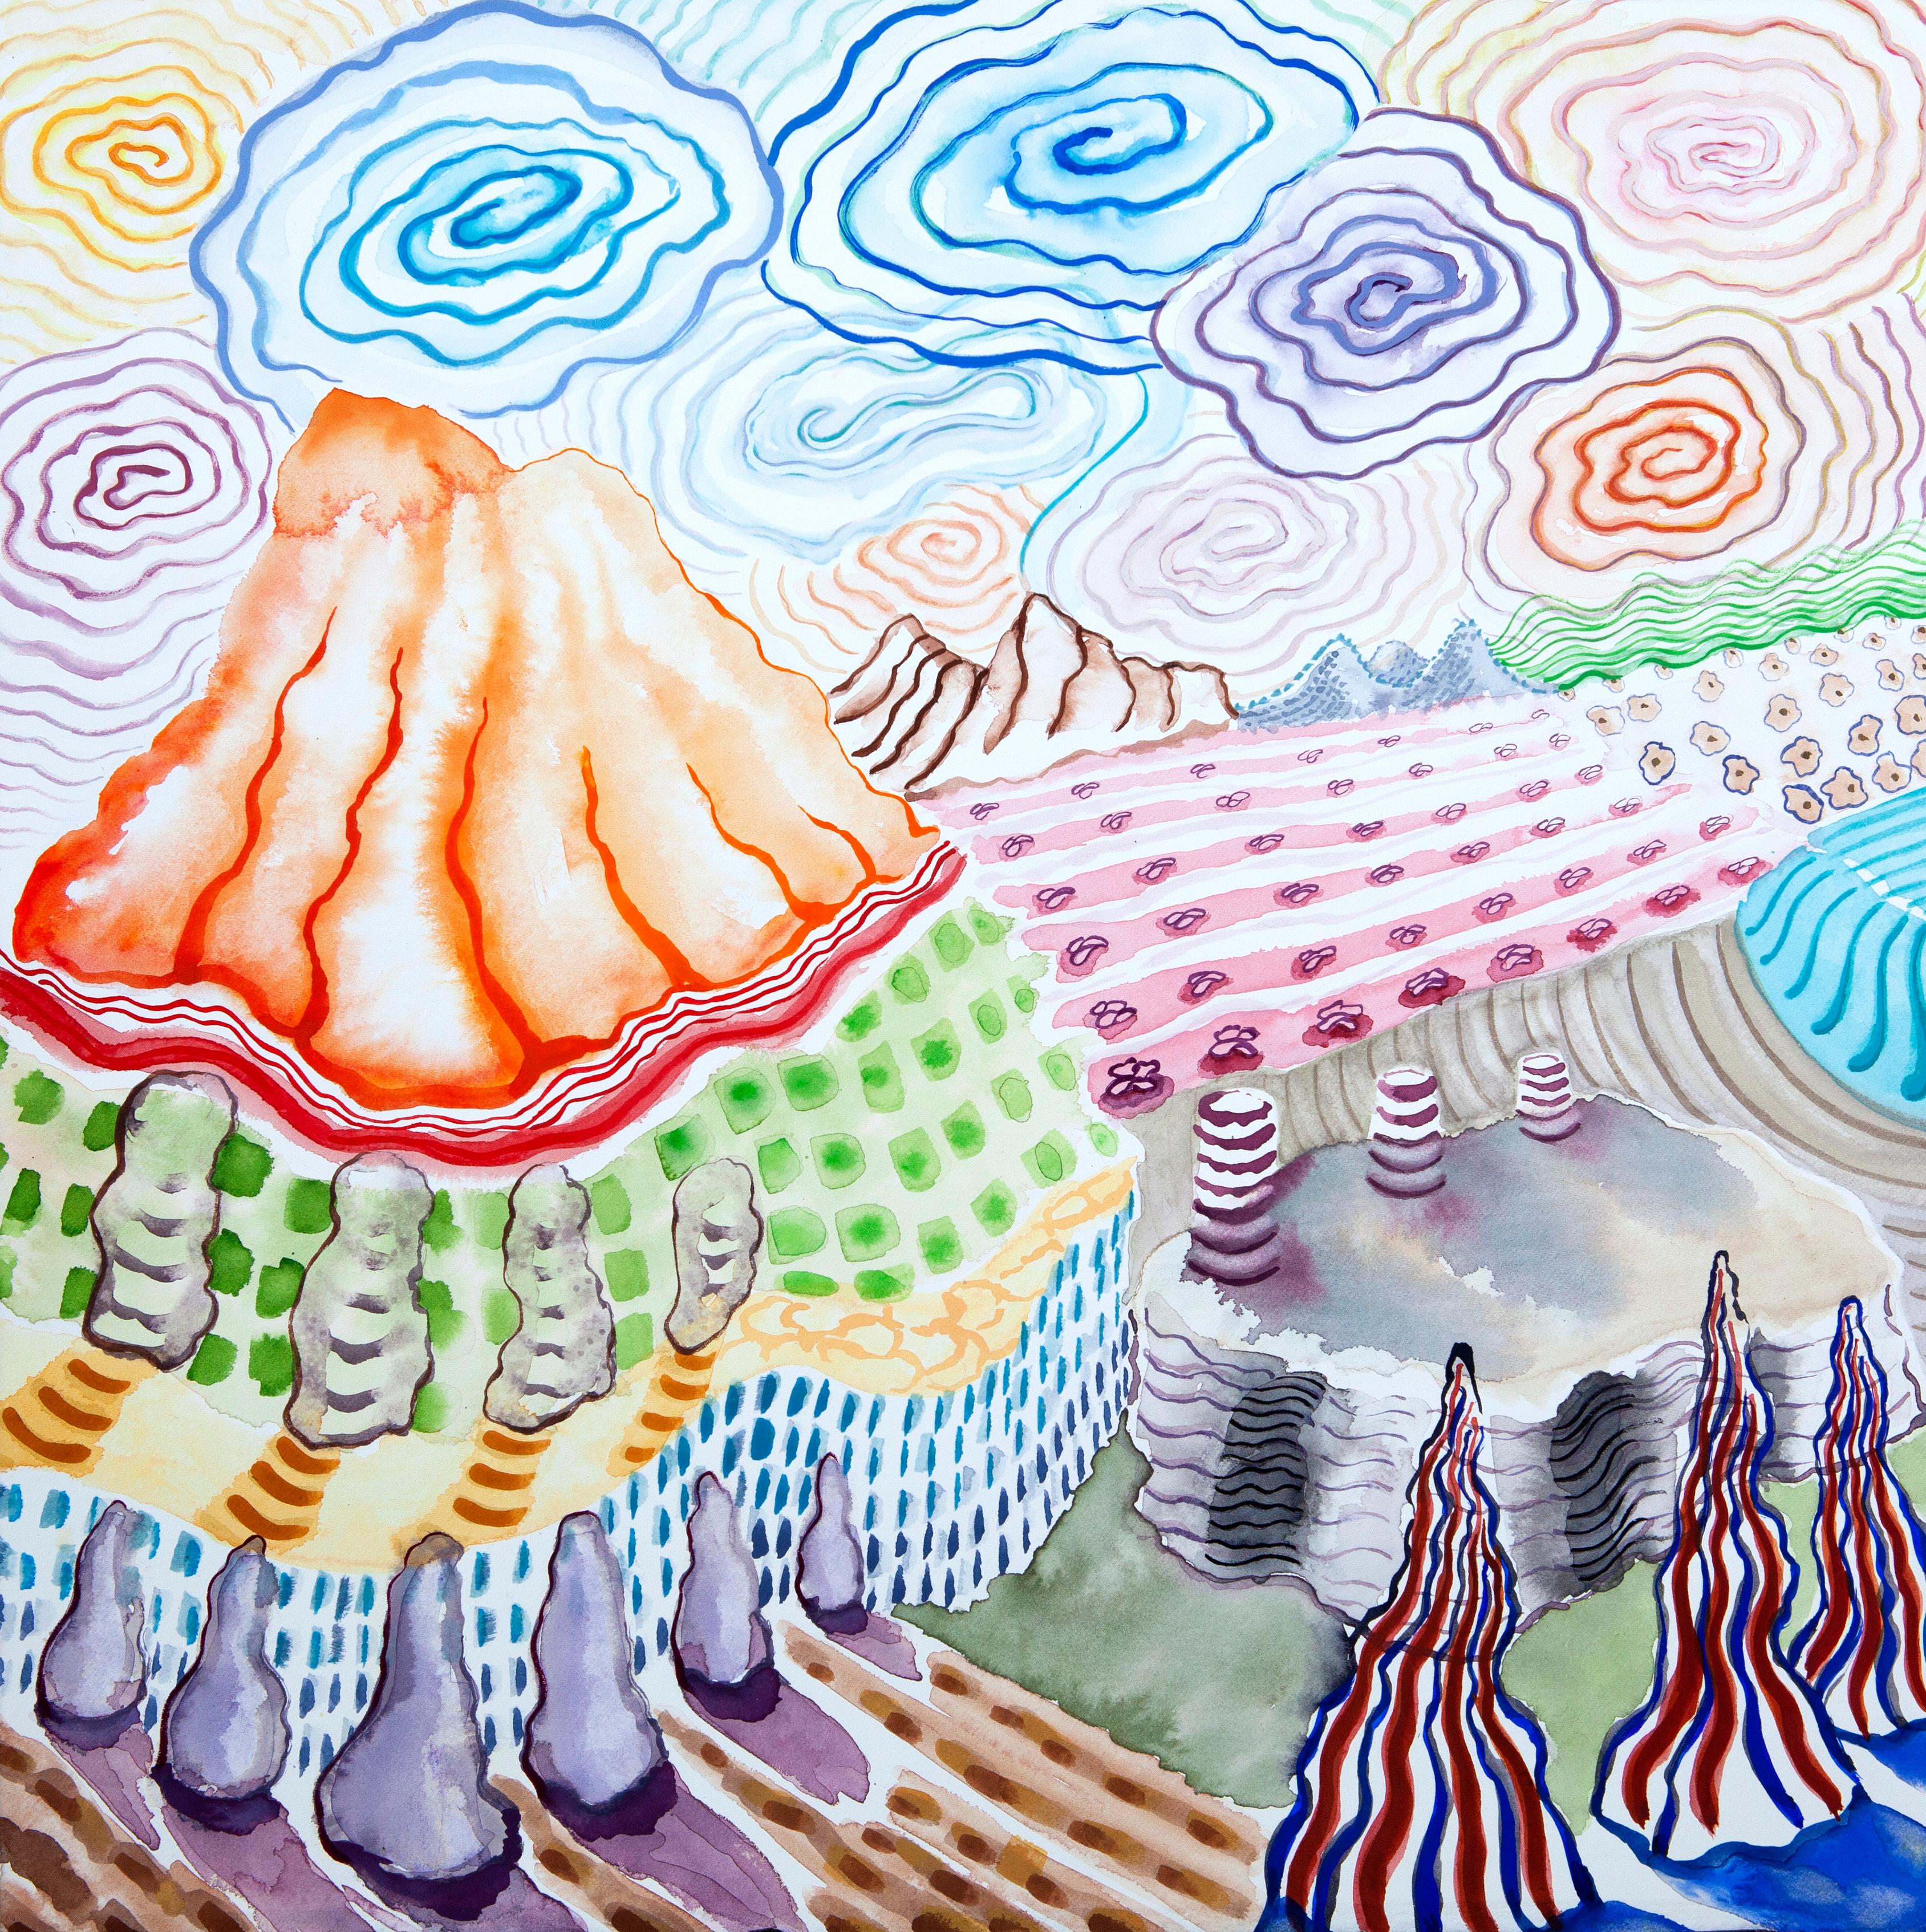 American Beauty, 23, surreal landscape painting on paper, bright patterns